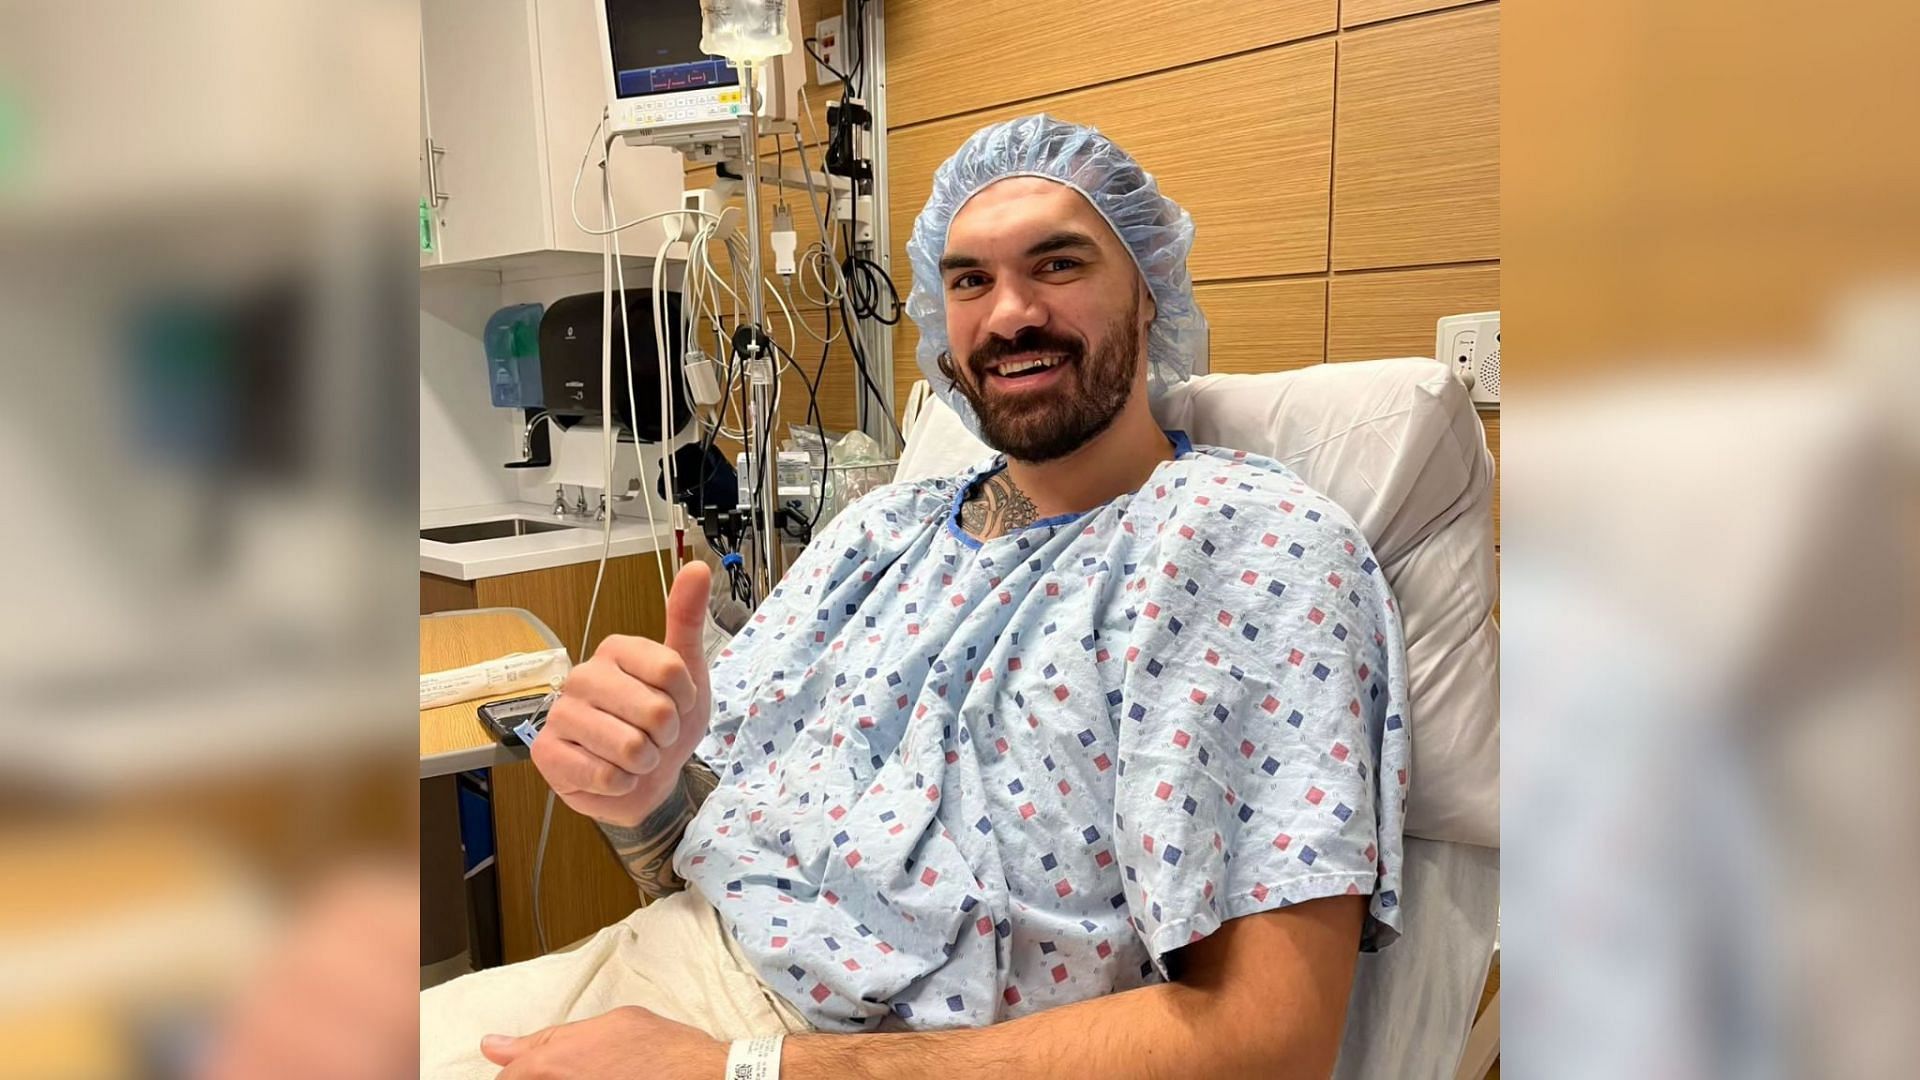 Steven Adams poses for a photo after his PCL surgery